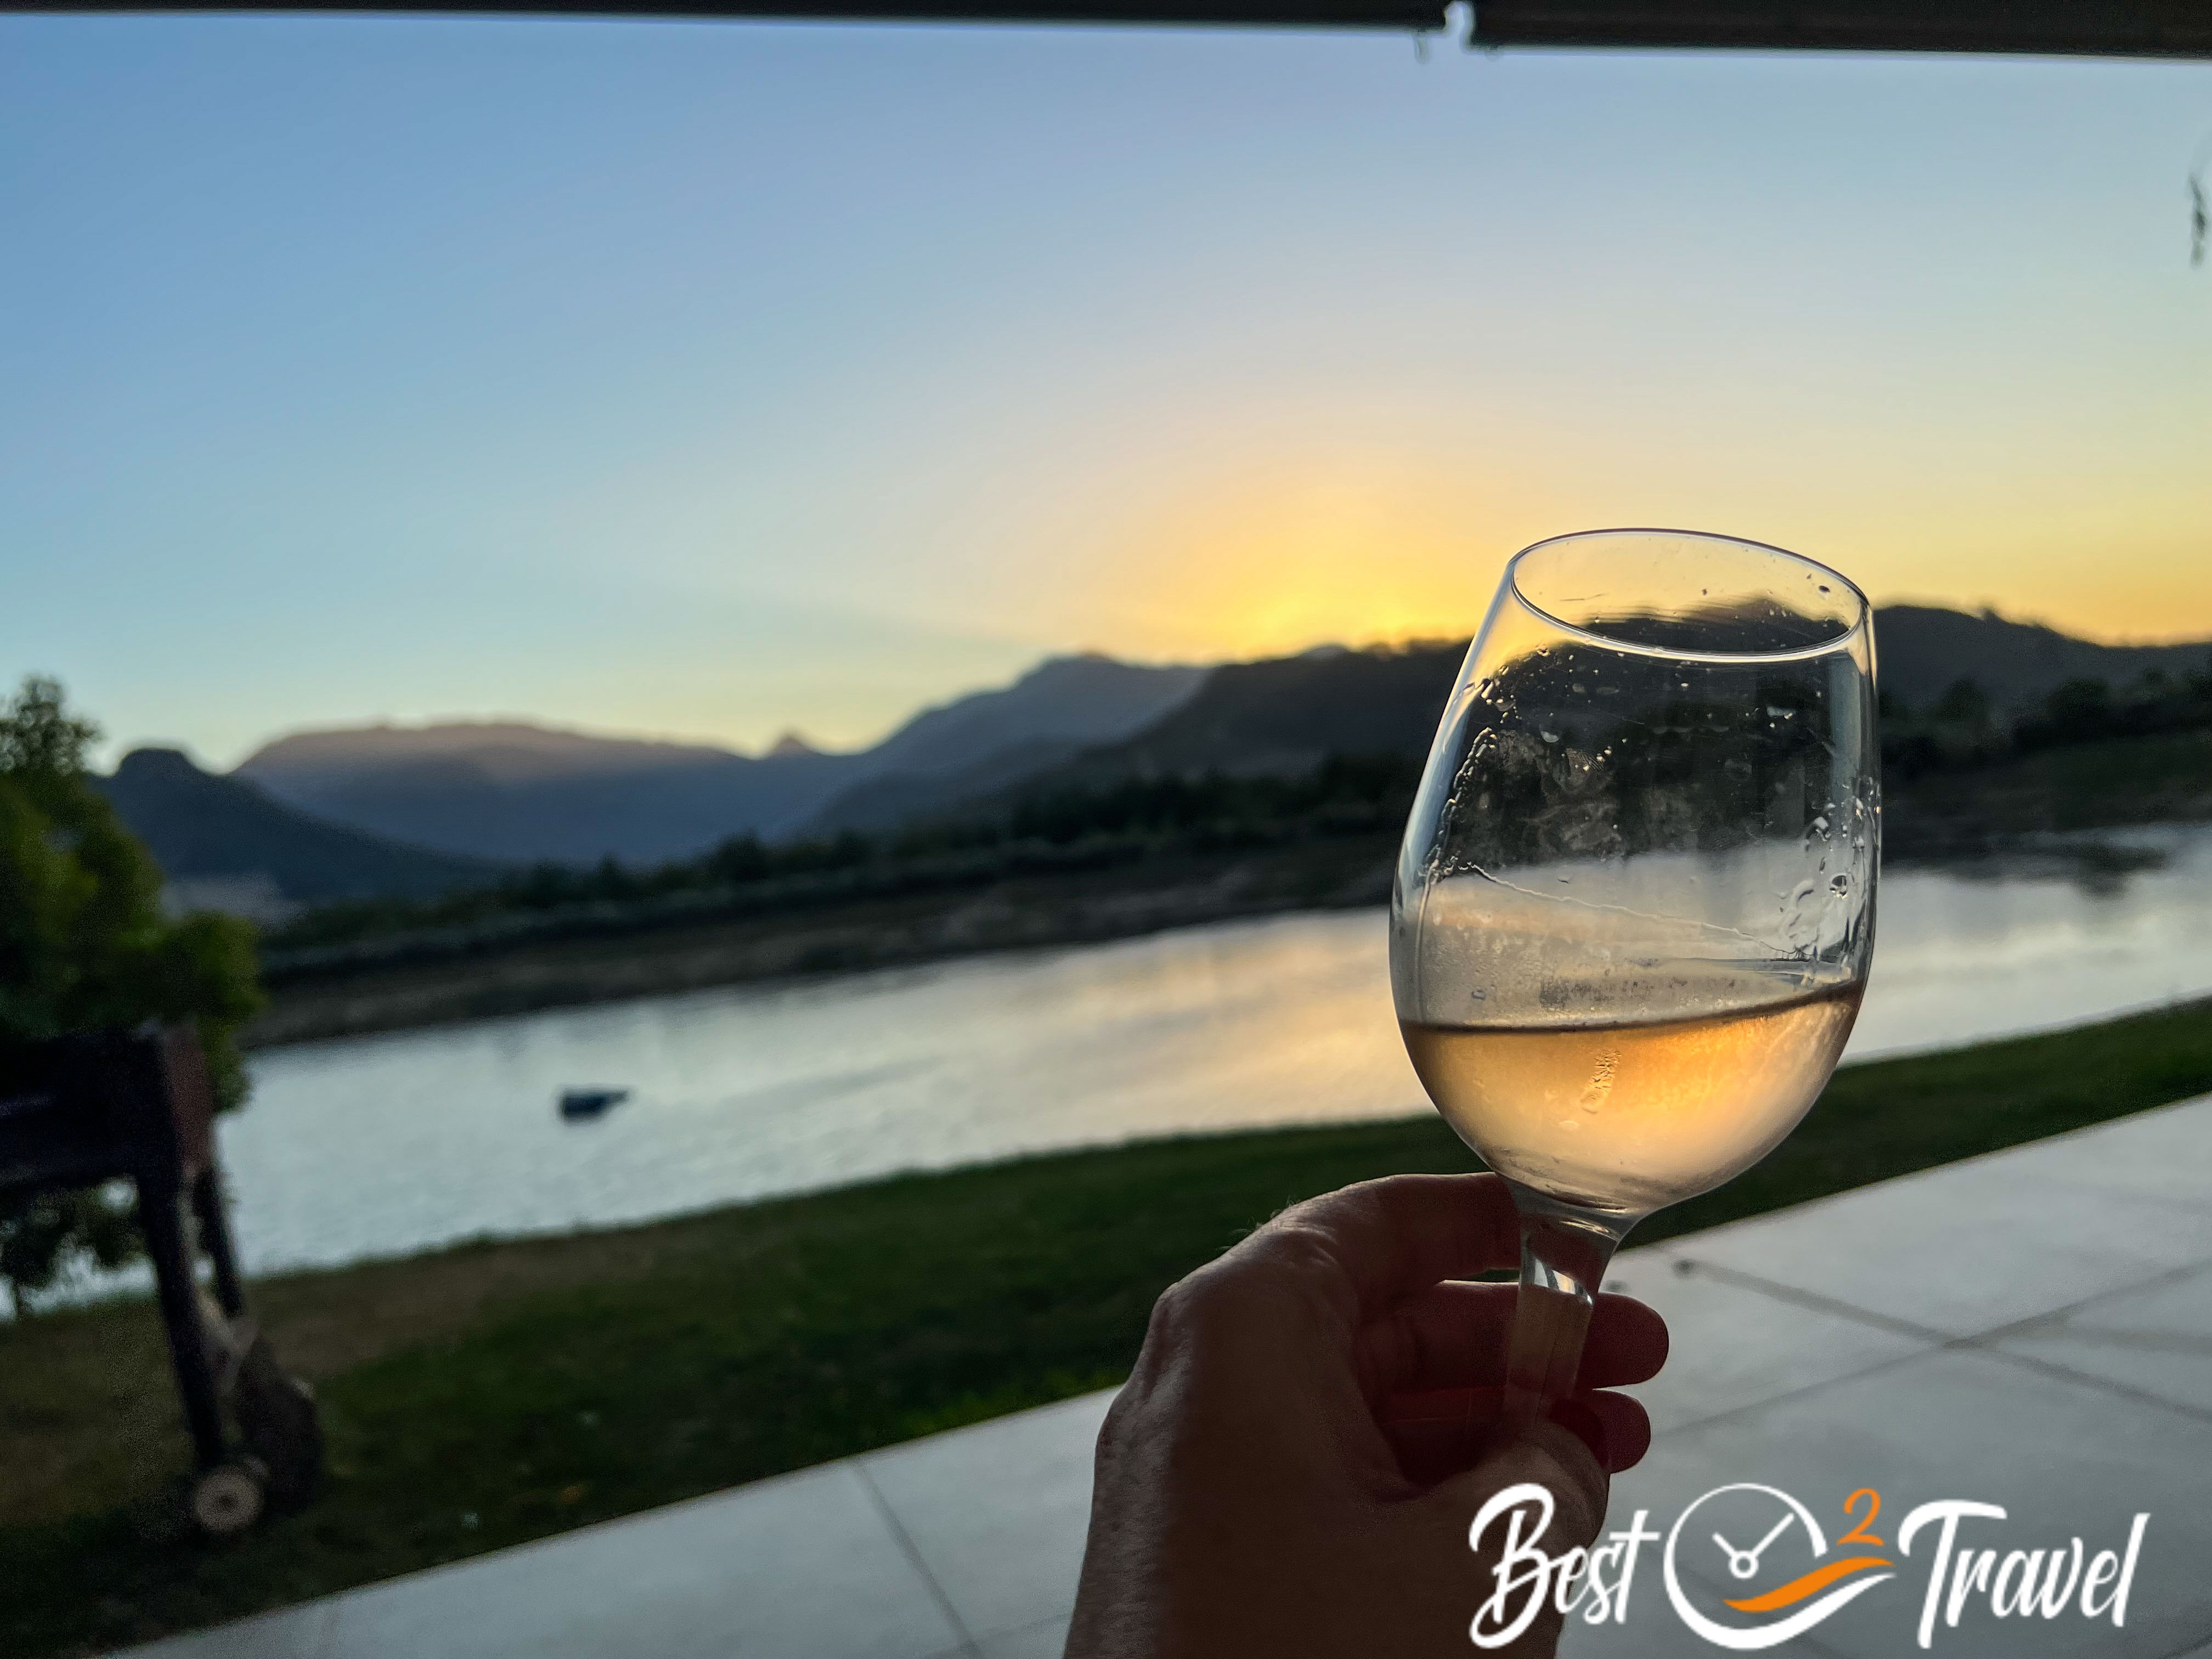 A half full wine glass in a beautiful landscape at sunset.